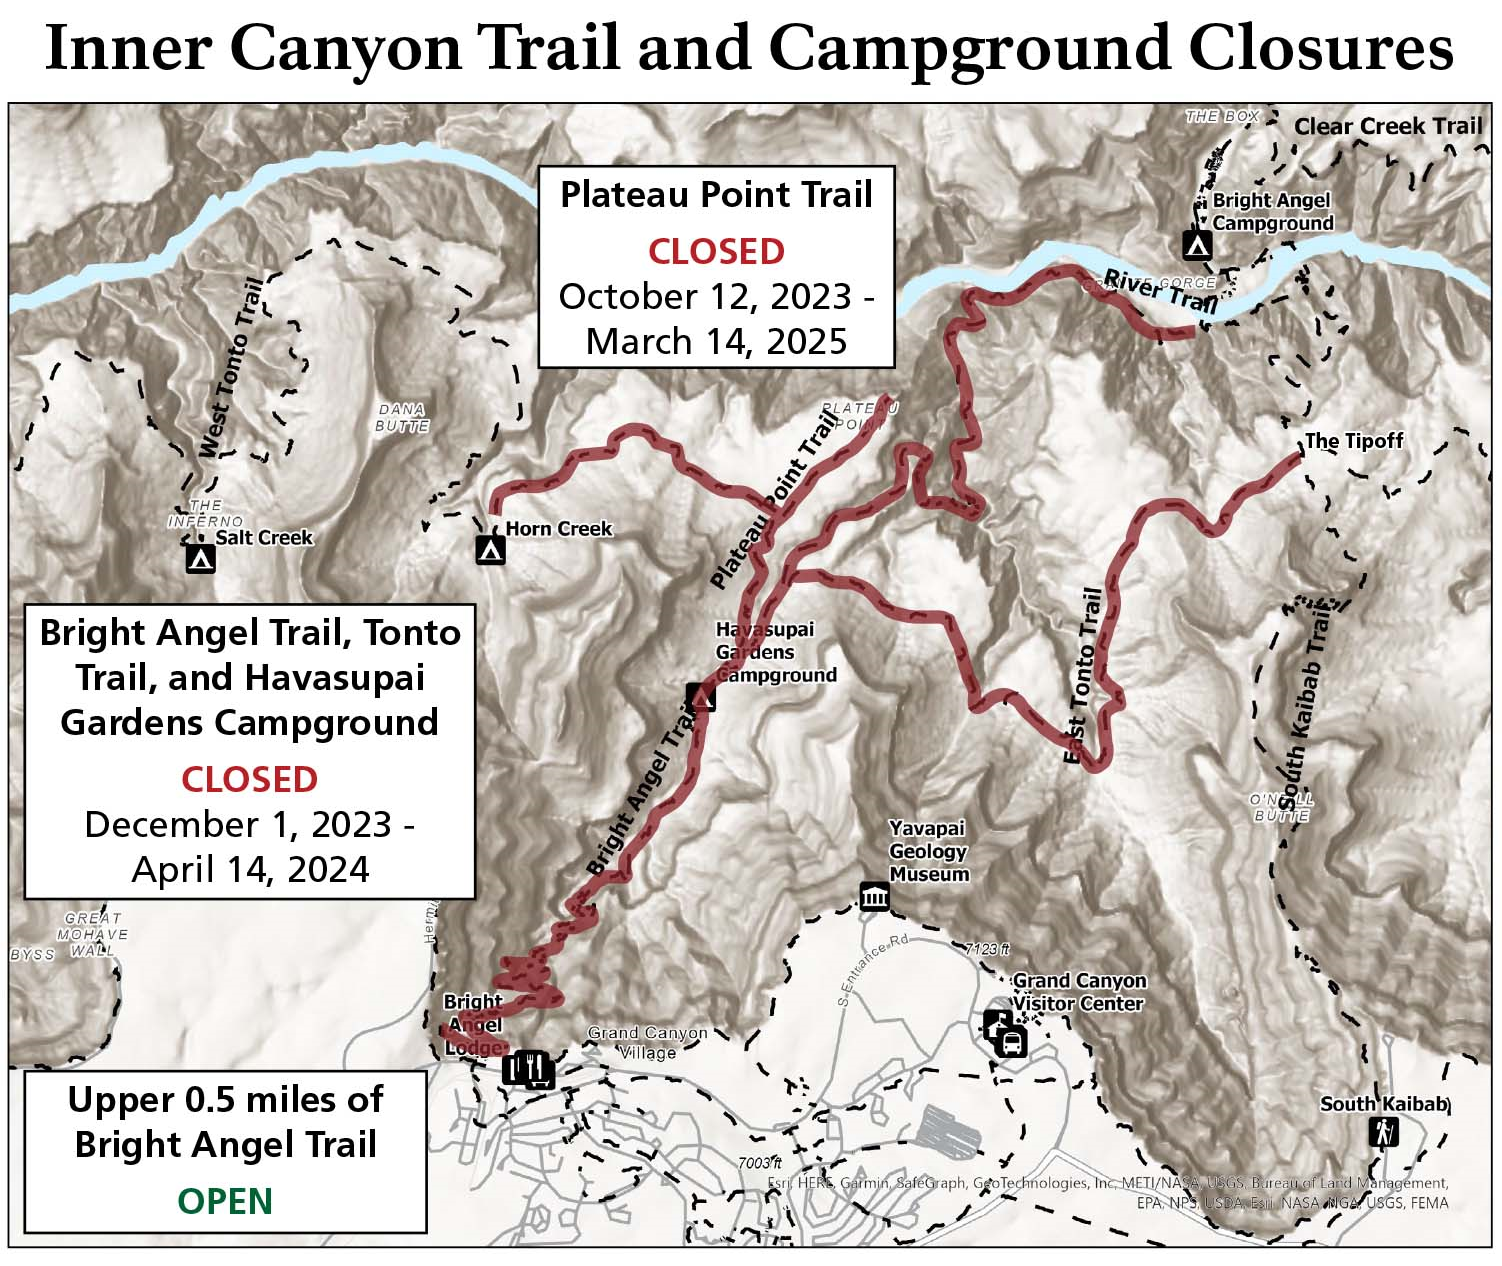 Map showing corridor trails. South Rim Village at the bottom and Colorado River at the top of the map. Trails highlighted red to indicate closures: Bright Angel Trail, Plateau Point Trail, and Tonto Trail just east of Horn Creek to The Tipoff.